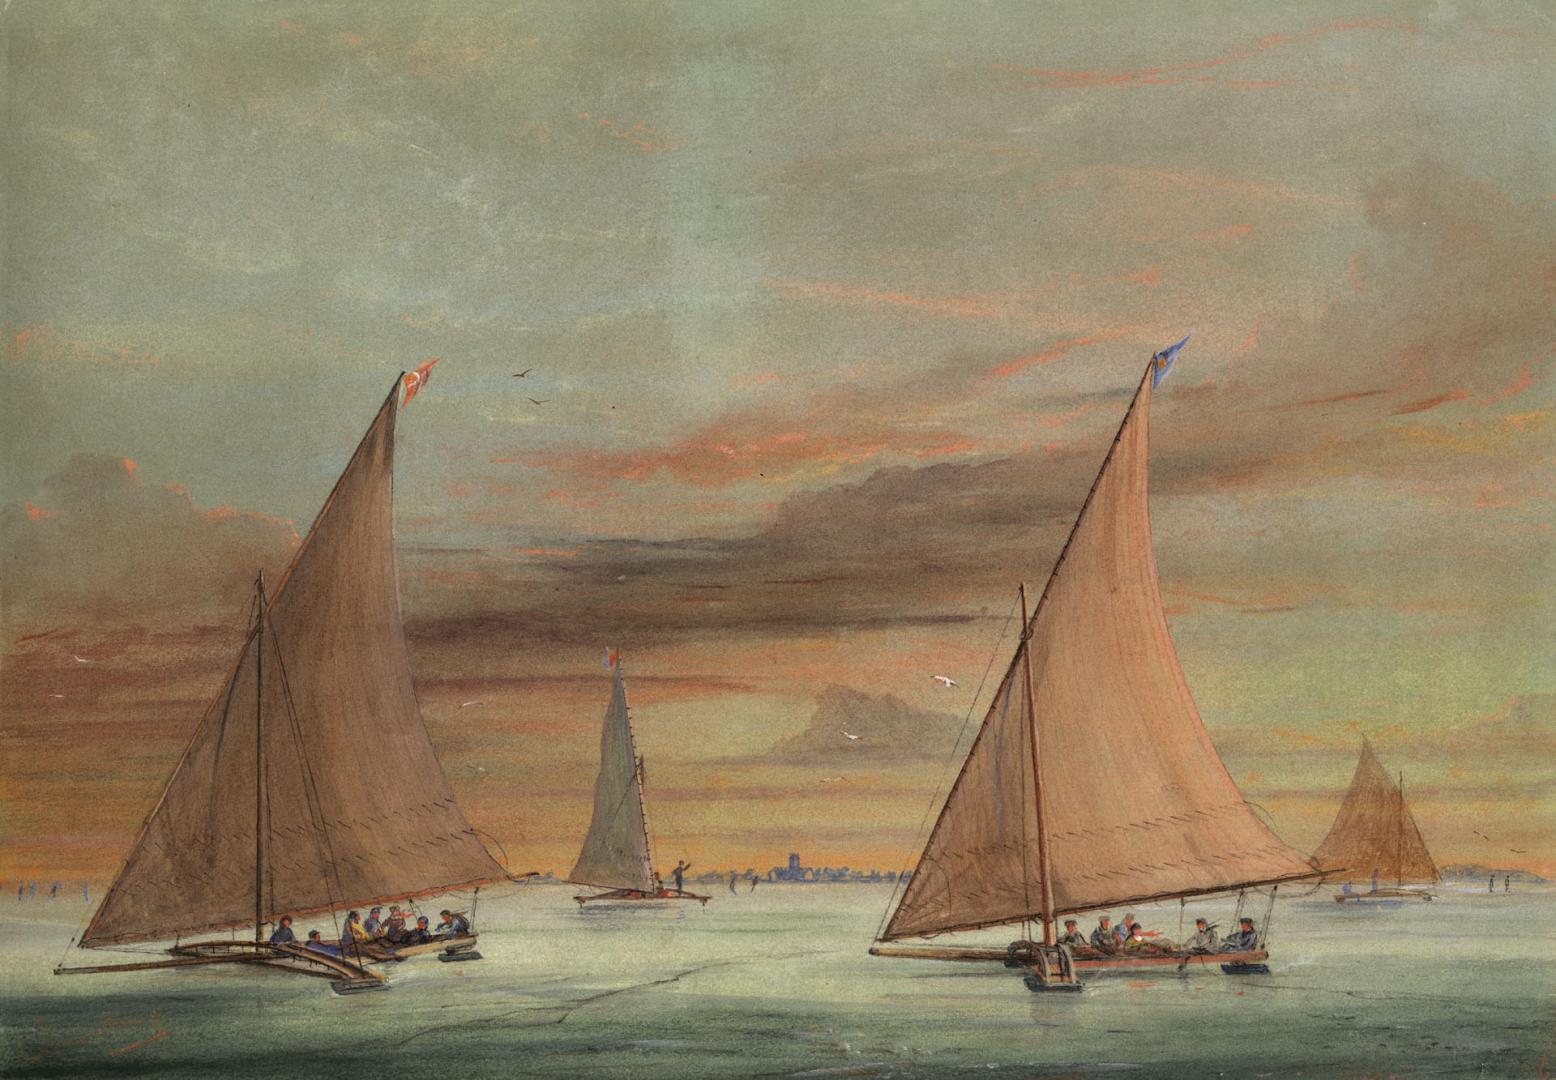 Image shows a few boats on the lake.